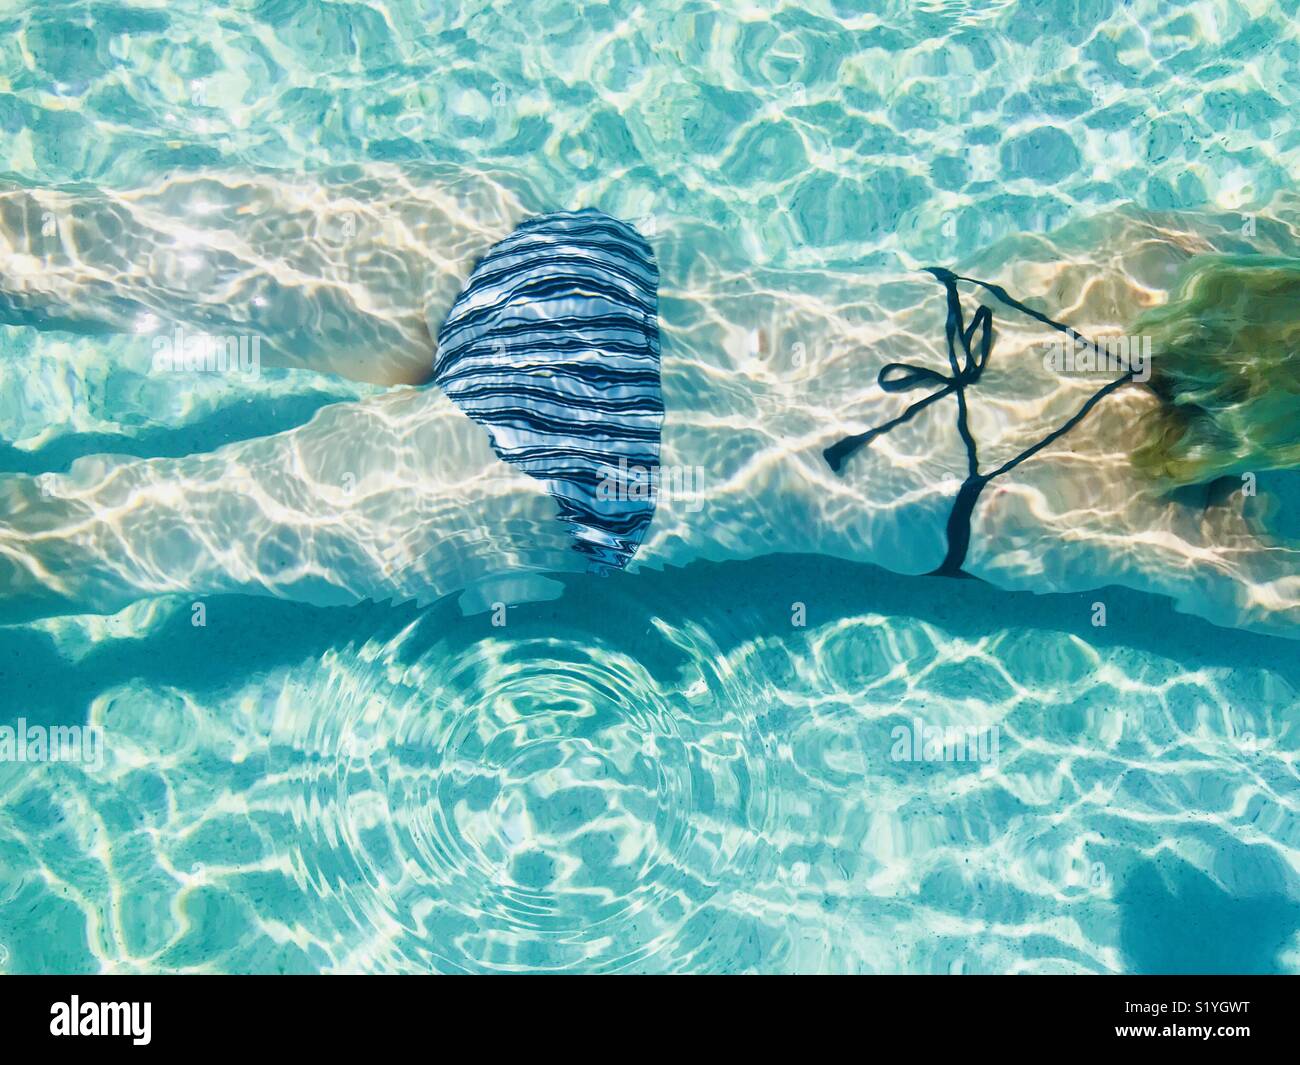 A women swimming underwater in a pool shot from above. Intercontinental hotel, Fiji. Stock Photo